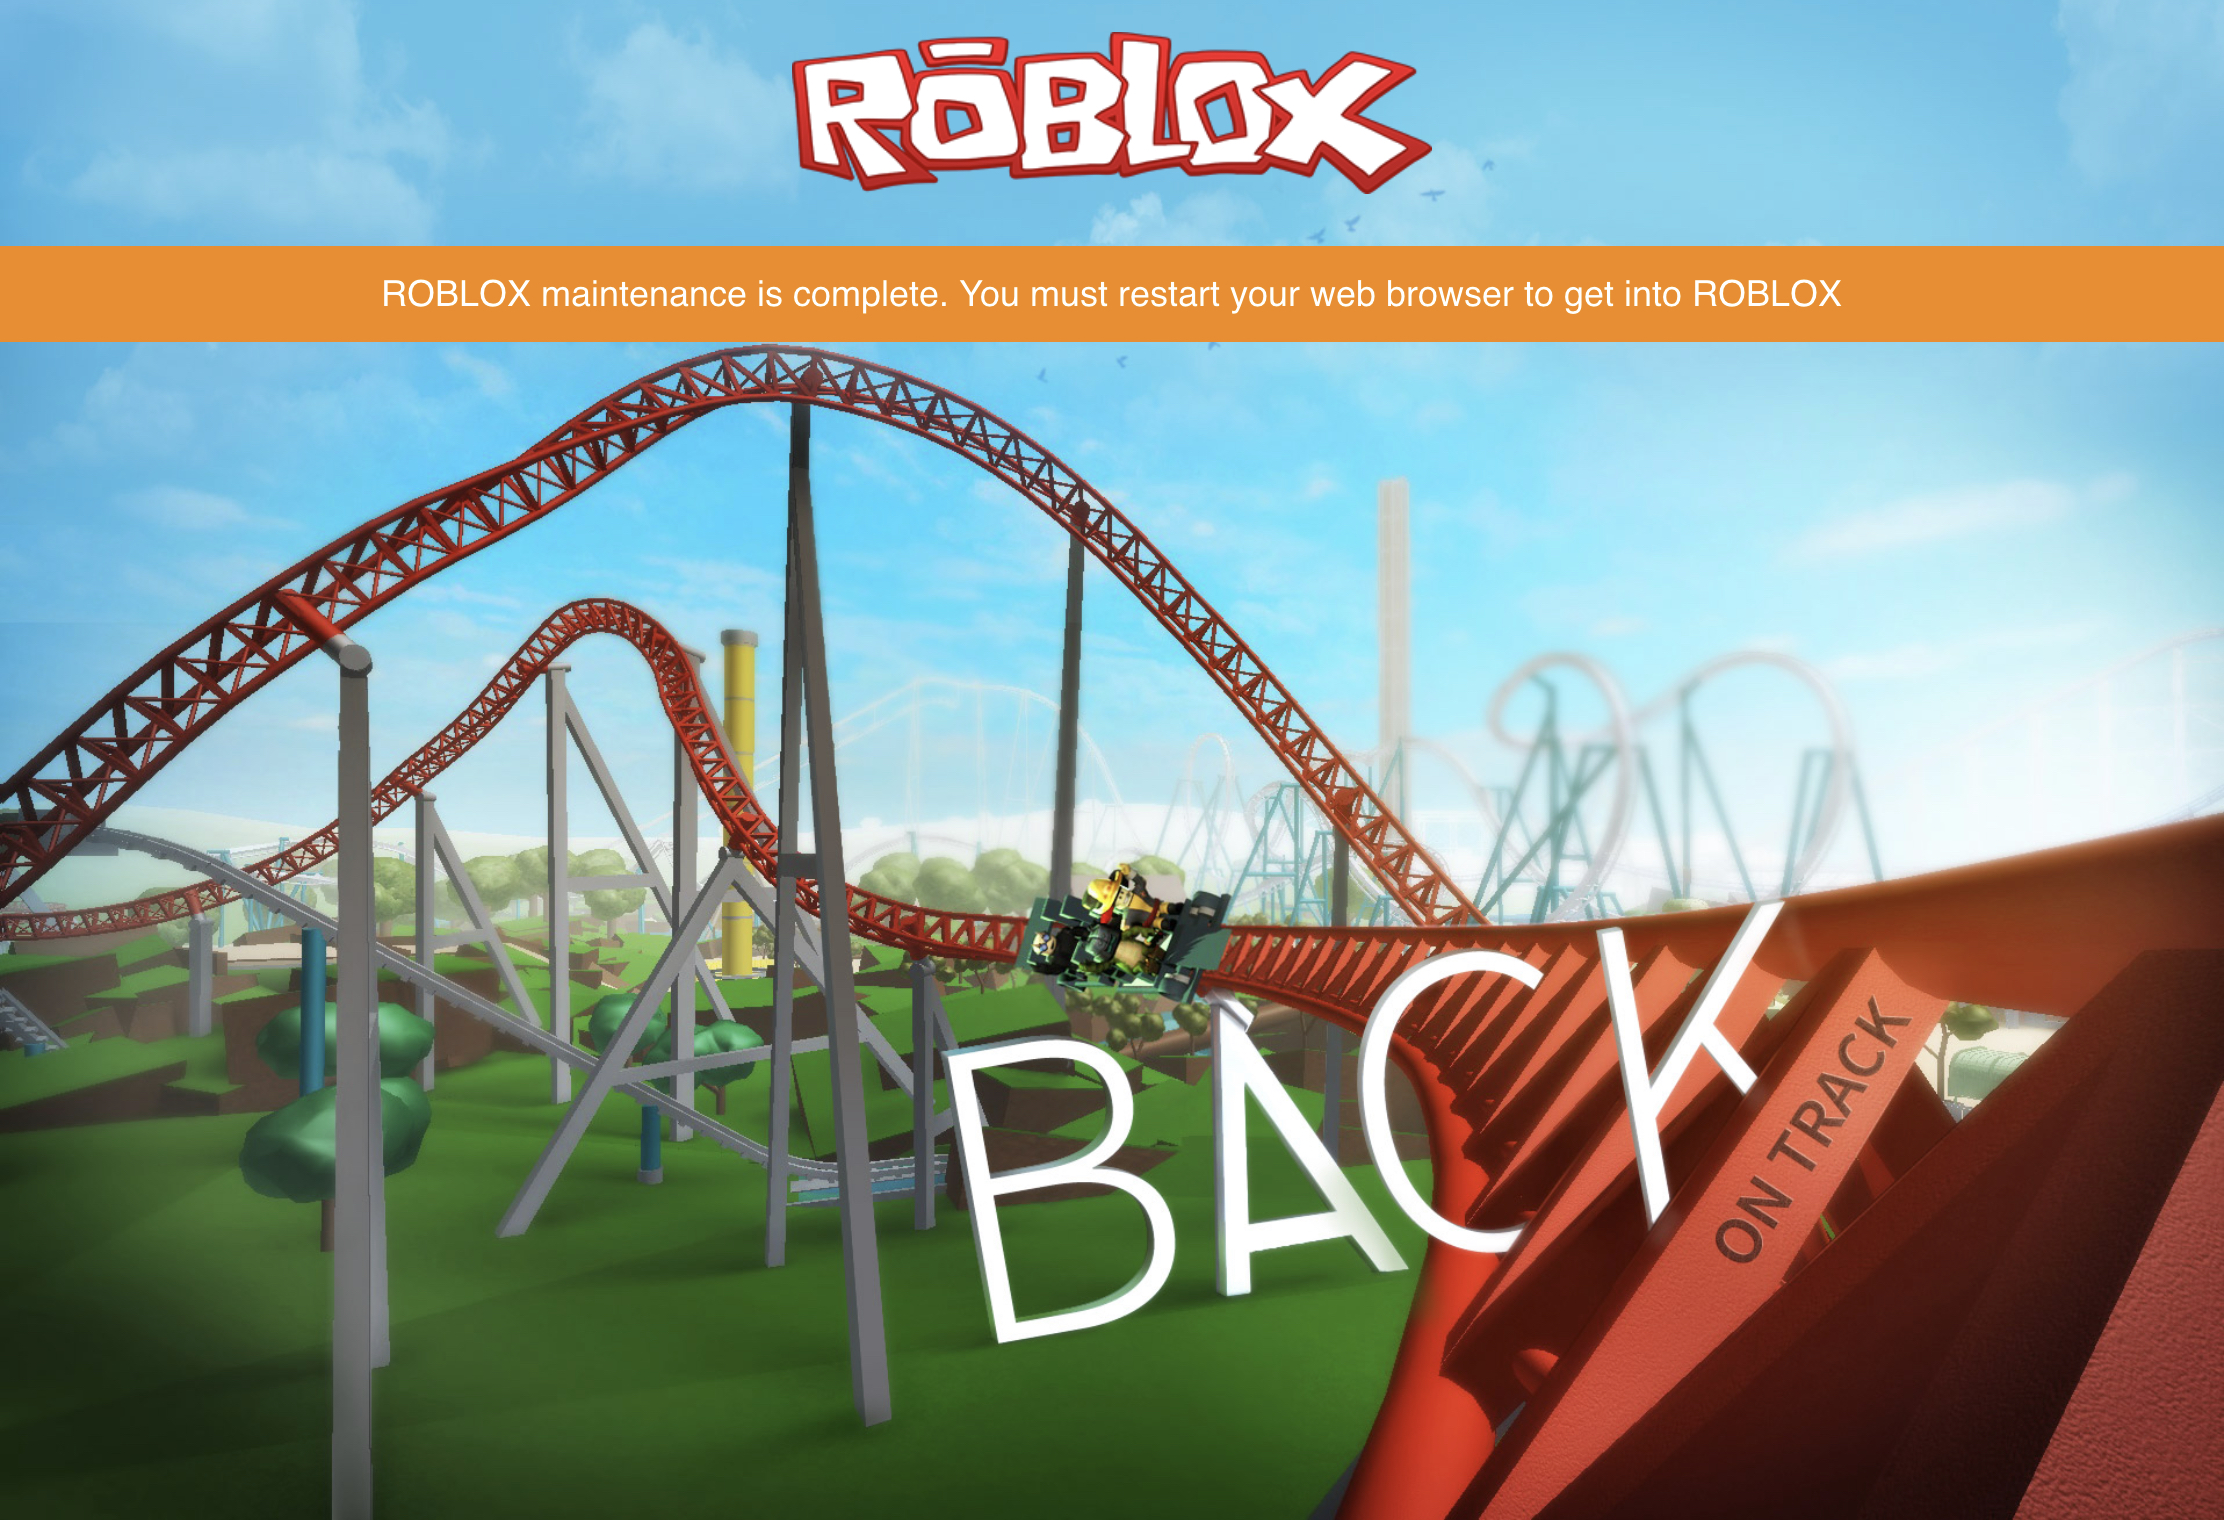 how long is roblox down for maintenance